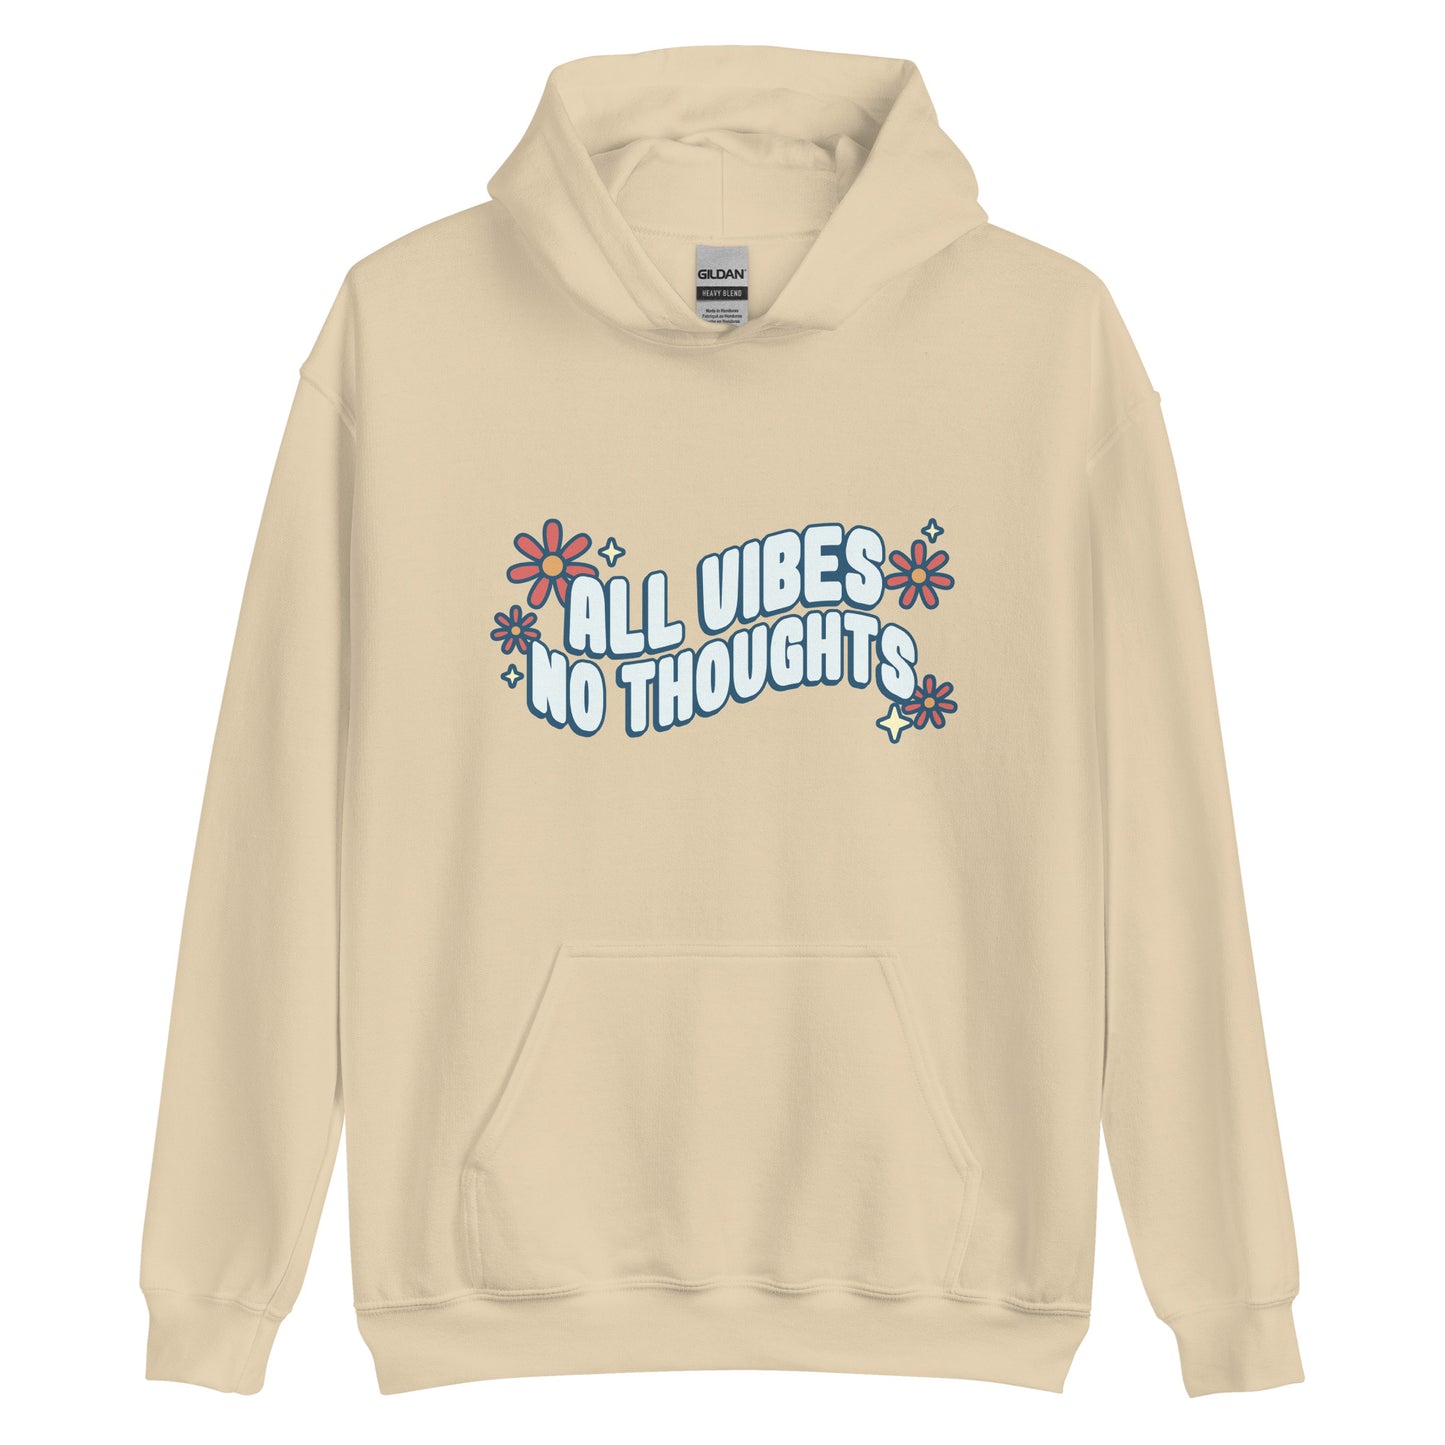 A light beige hooded sweatshirt featuring text that reads "All vibes, no thoughts". Around the text are a few pink flowers and pale yellow sparkles.